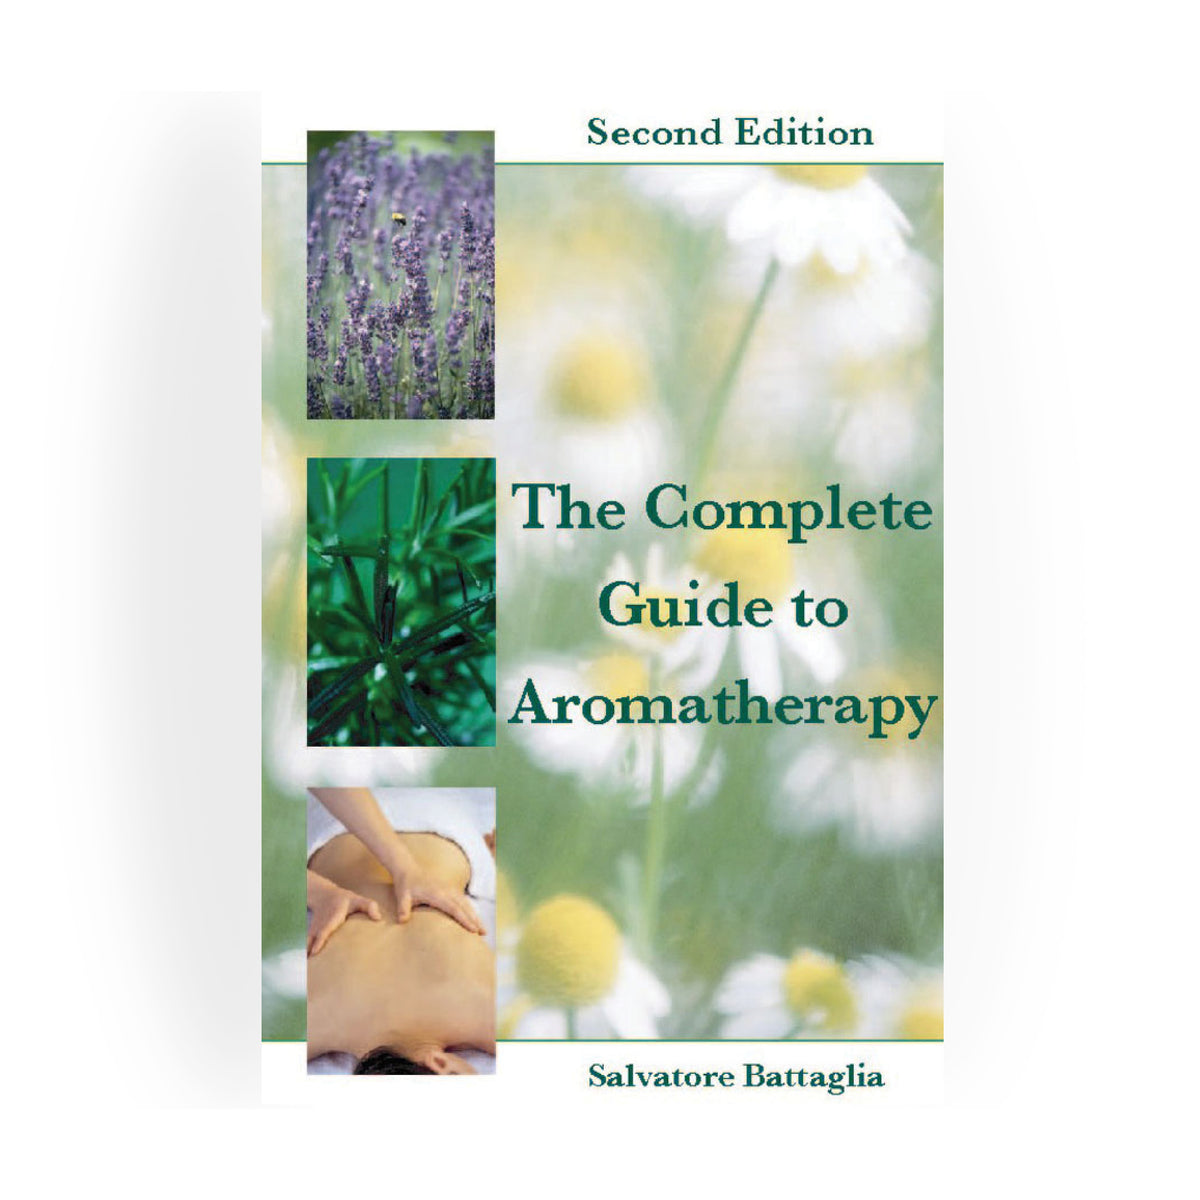 The Complete Guide to Aromatherapy Second Edition